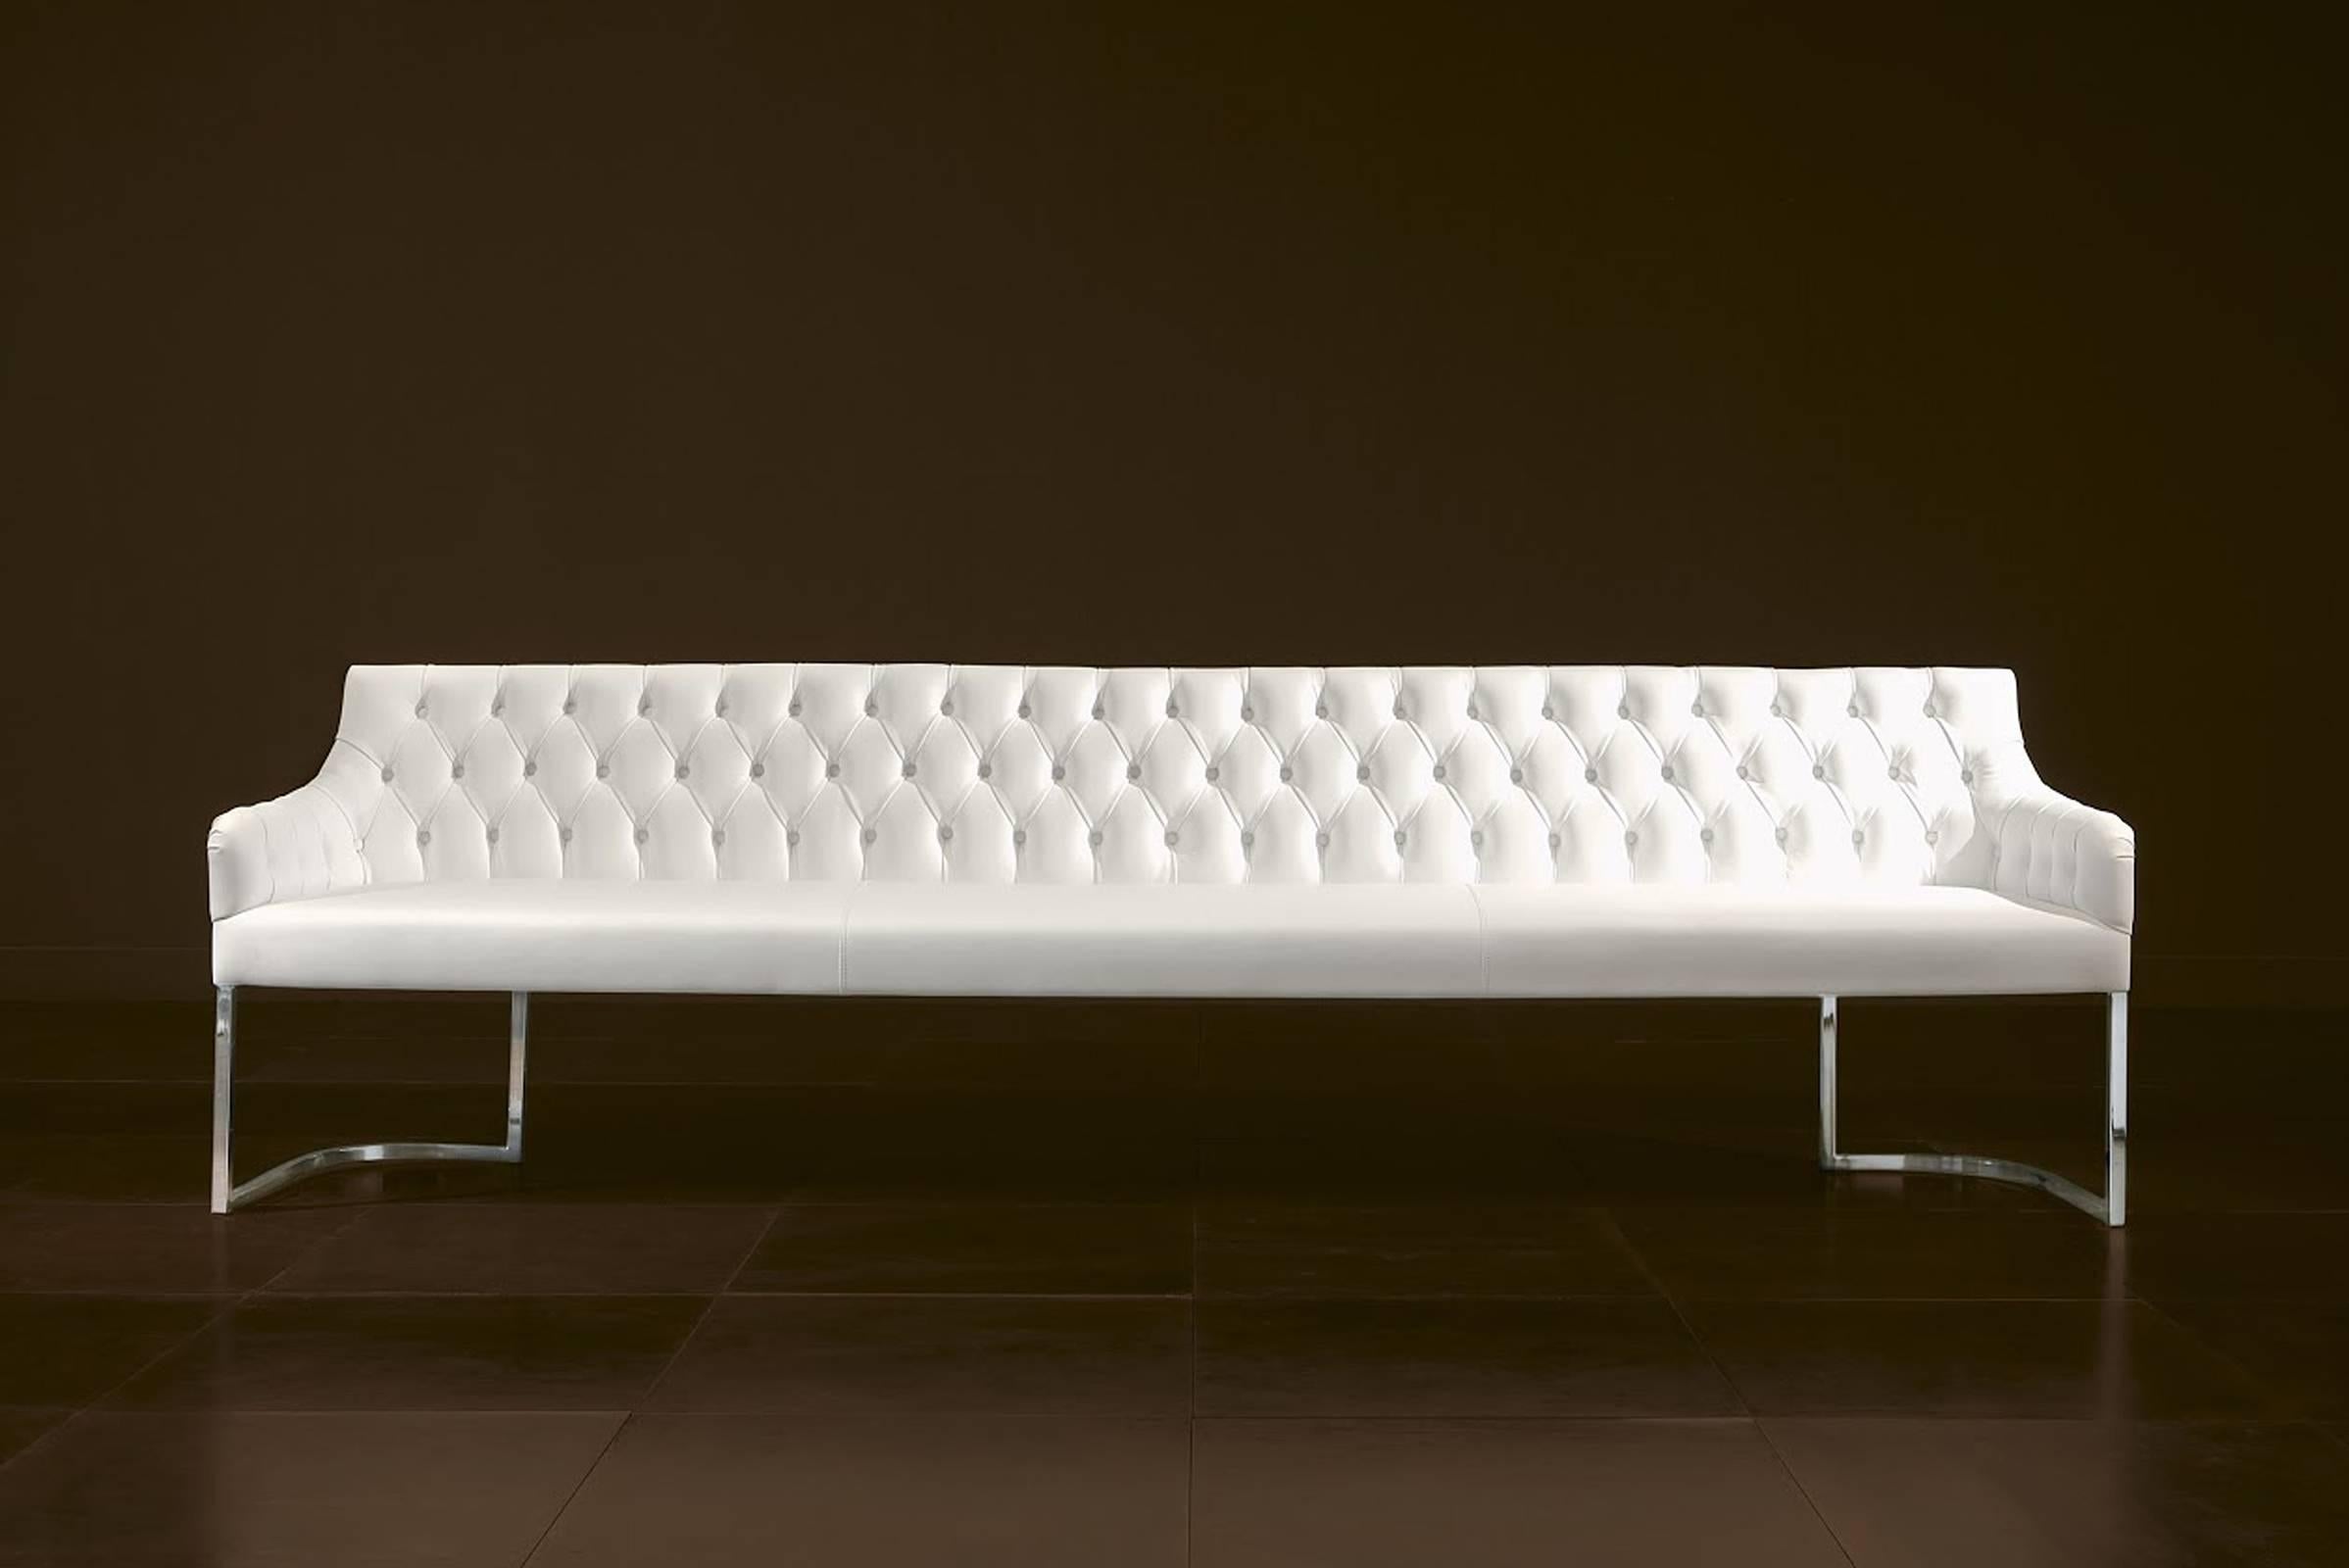 Bench Catana with structure in solid wood and covered with 
white high quality genuine leather. With polished stainless steel
base. Also availbale with bronze base and other fabrics on request
with up charge.
